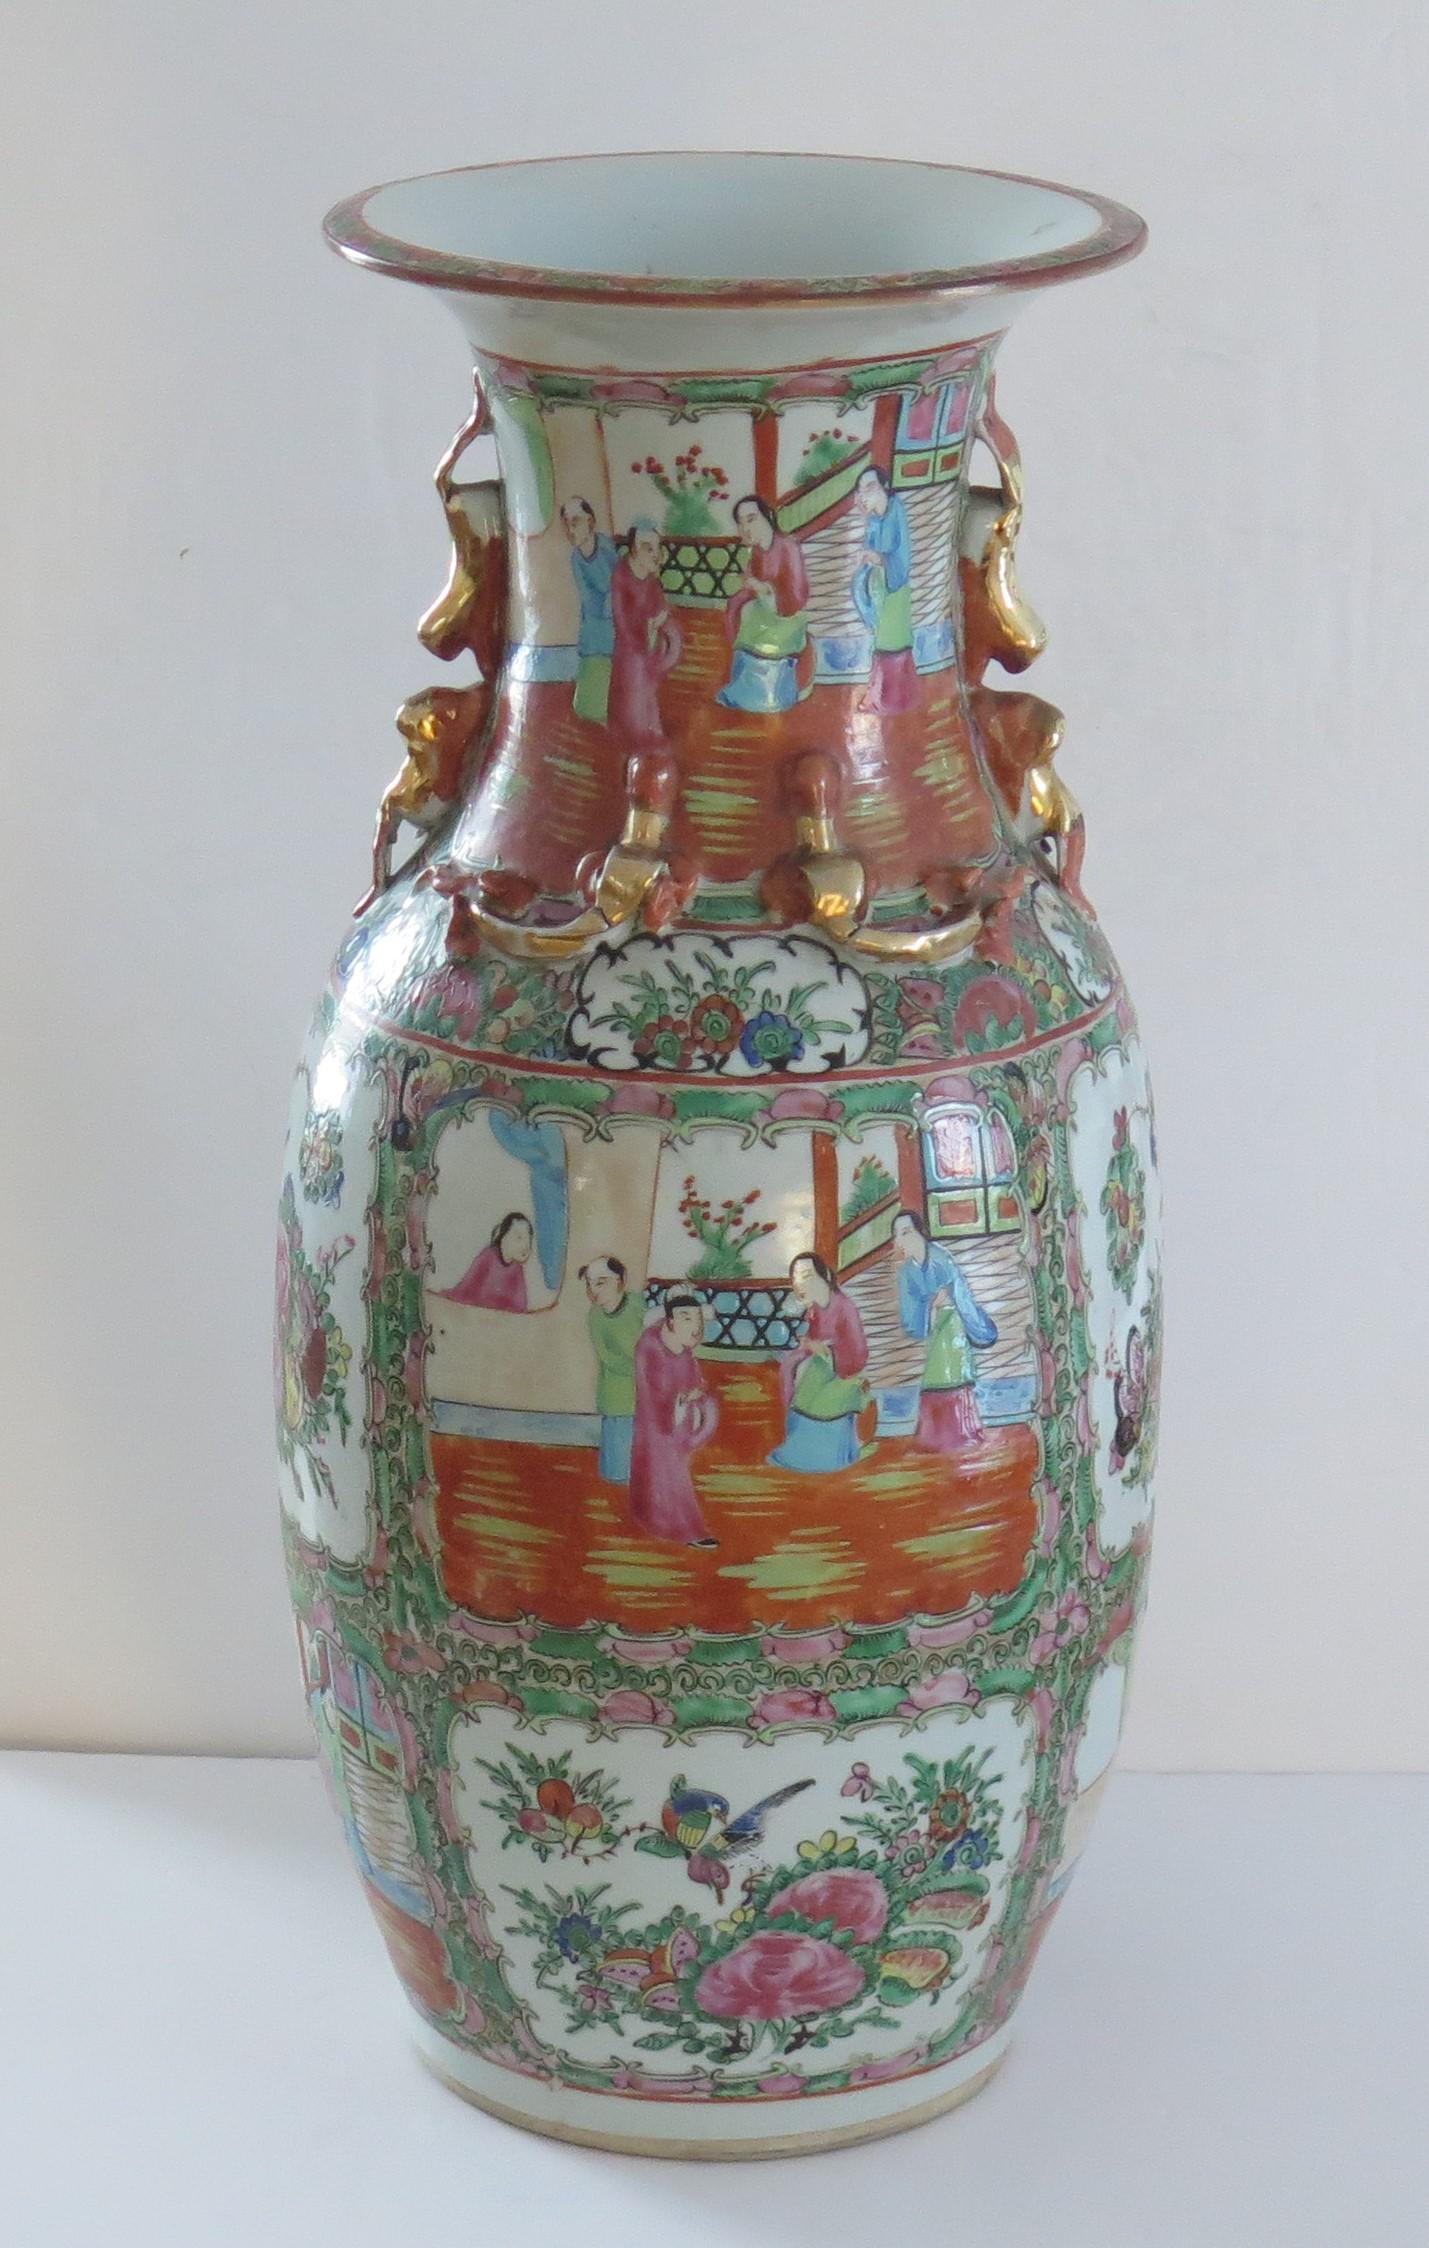 This is a very good quality, highly decorative Chinese export, Imperial Canton, porcelain, Rose medallion, large Vase which we date to the mid 19th century, Qing dynasty, circa 1850.

The vase has a baluster shape with a flared rim and is